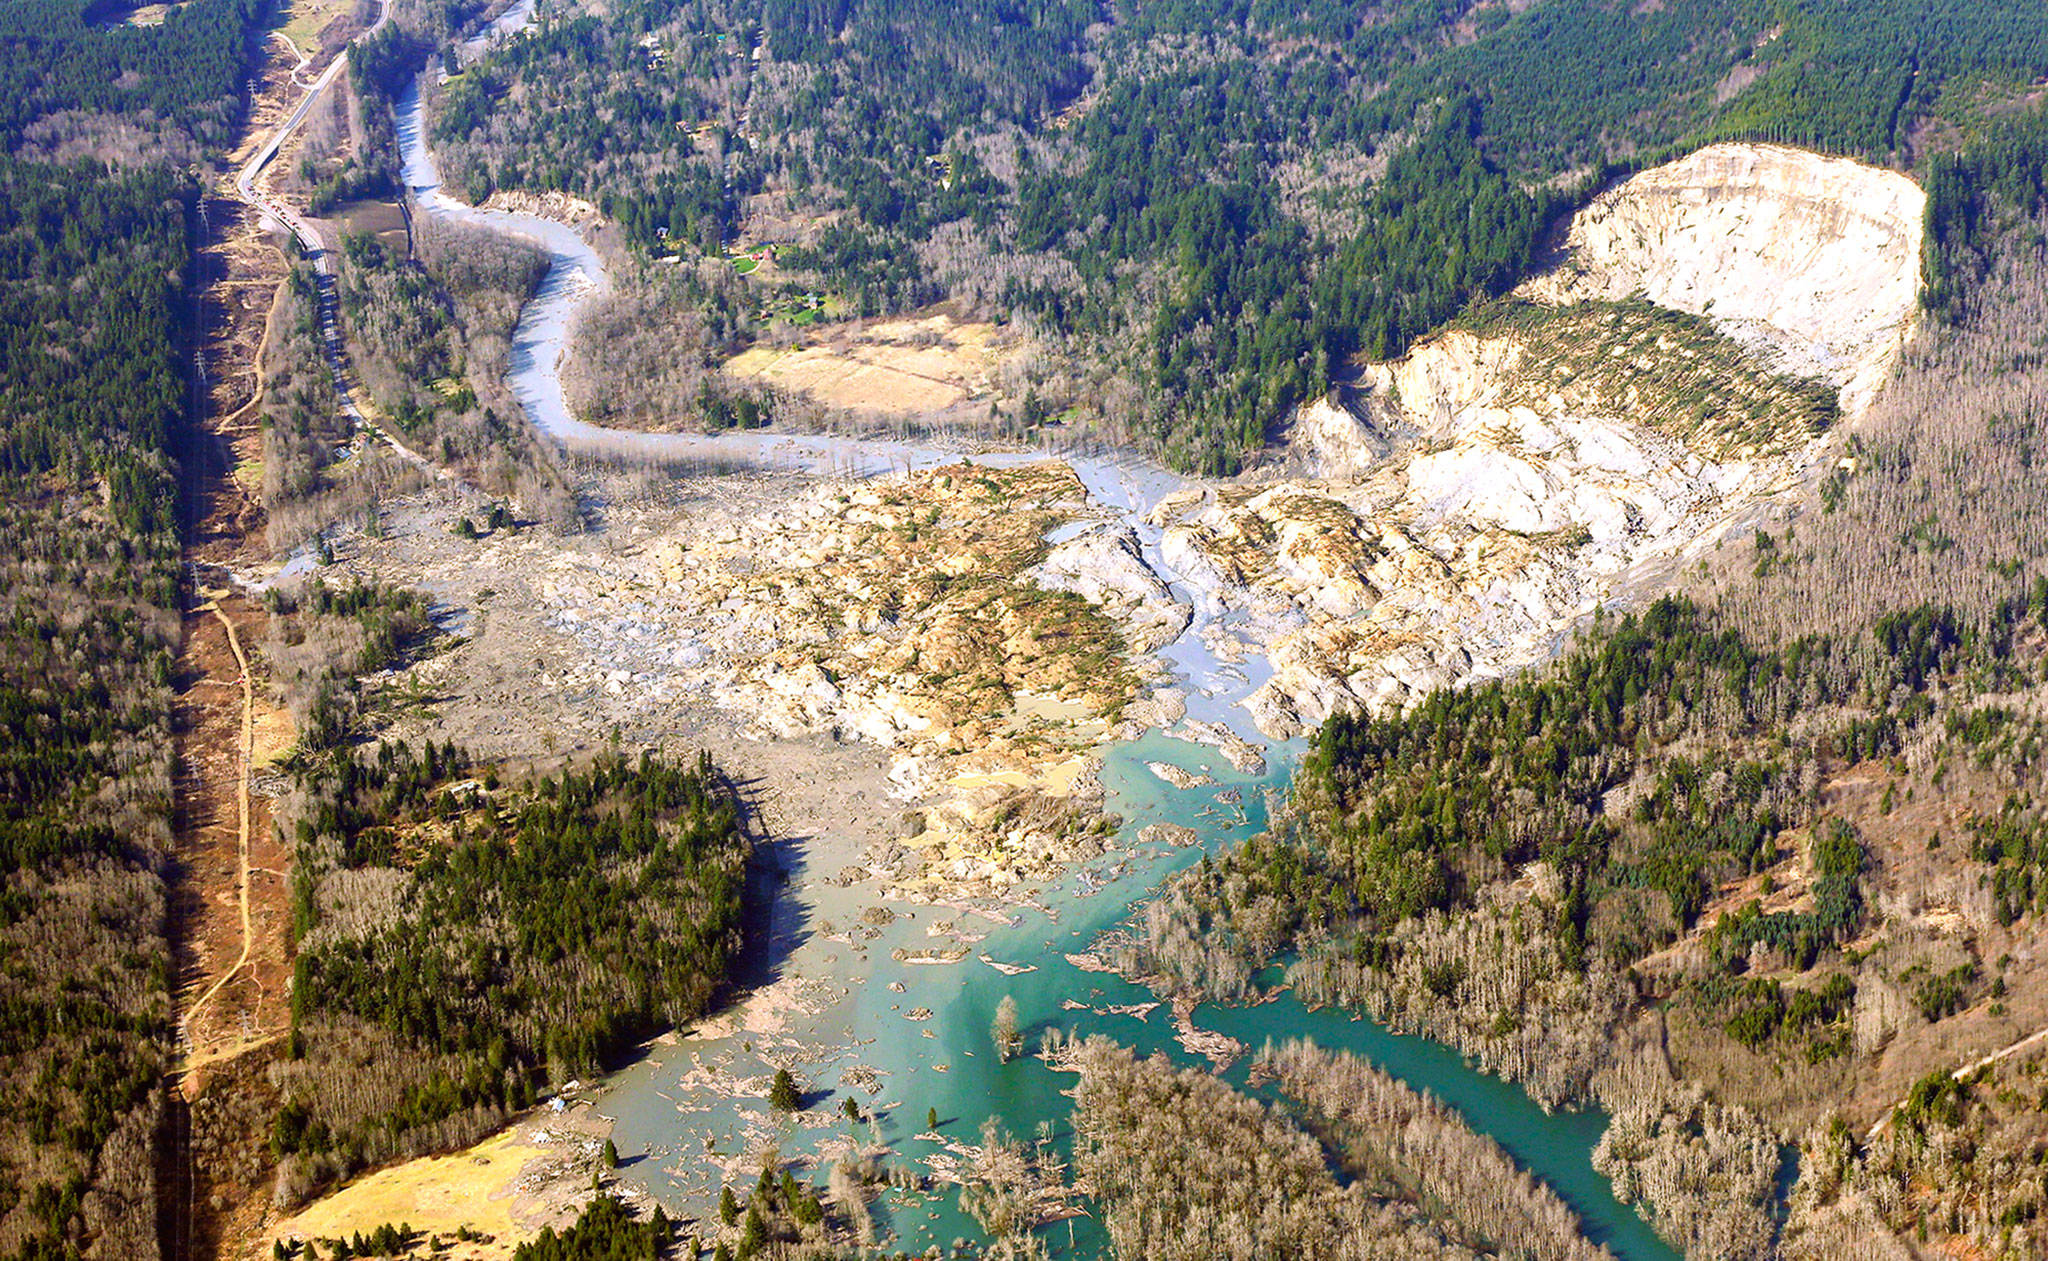 The massive slide that killed 43 people is shown in a 2014 aerial photo taken two days after it occurred near Oso. (AP Photo/Ted S. Warren)